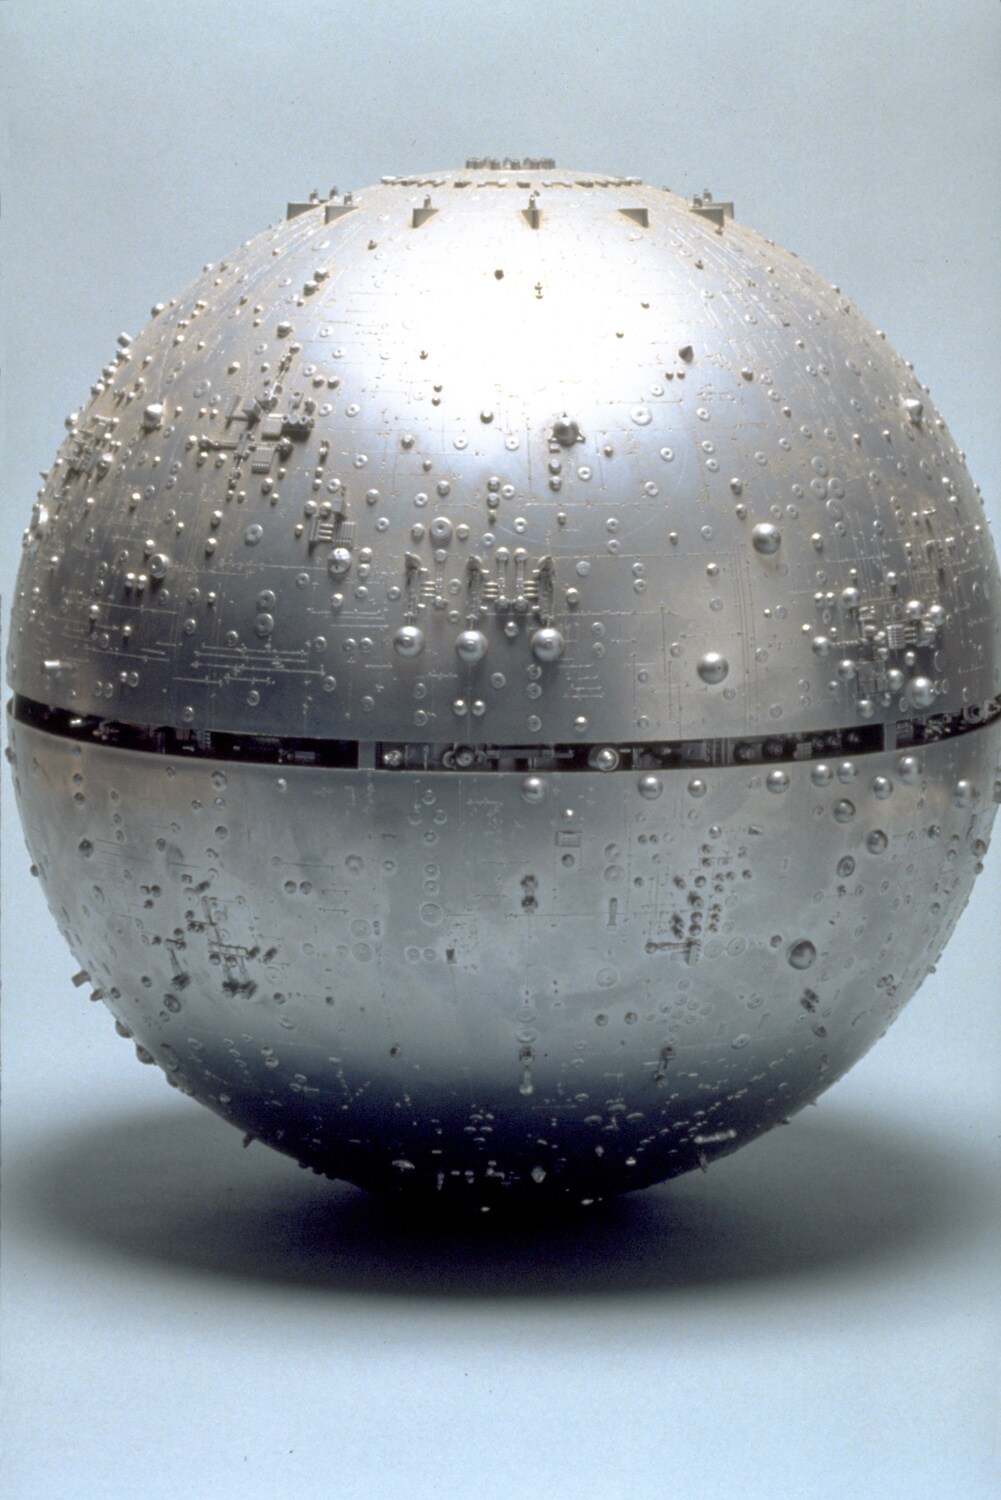 Colin Cantwell’s Death Star.